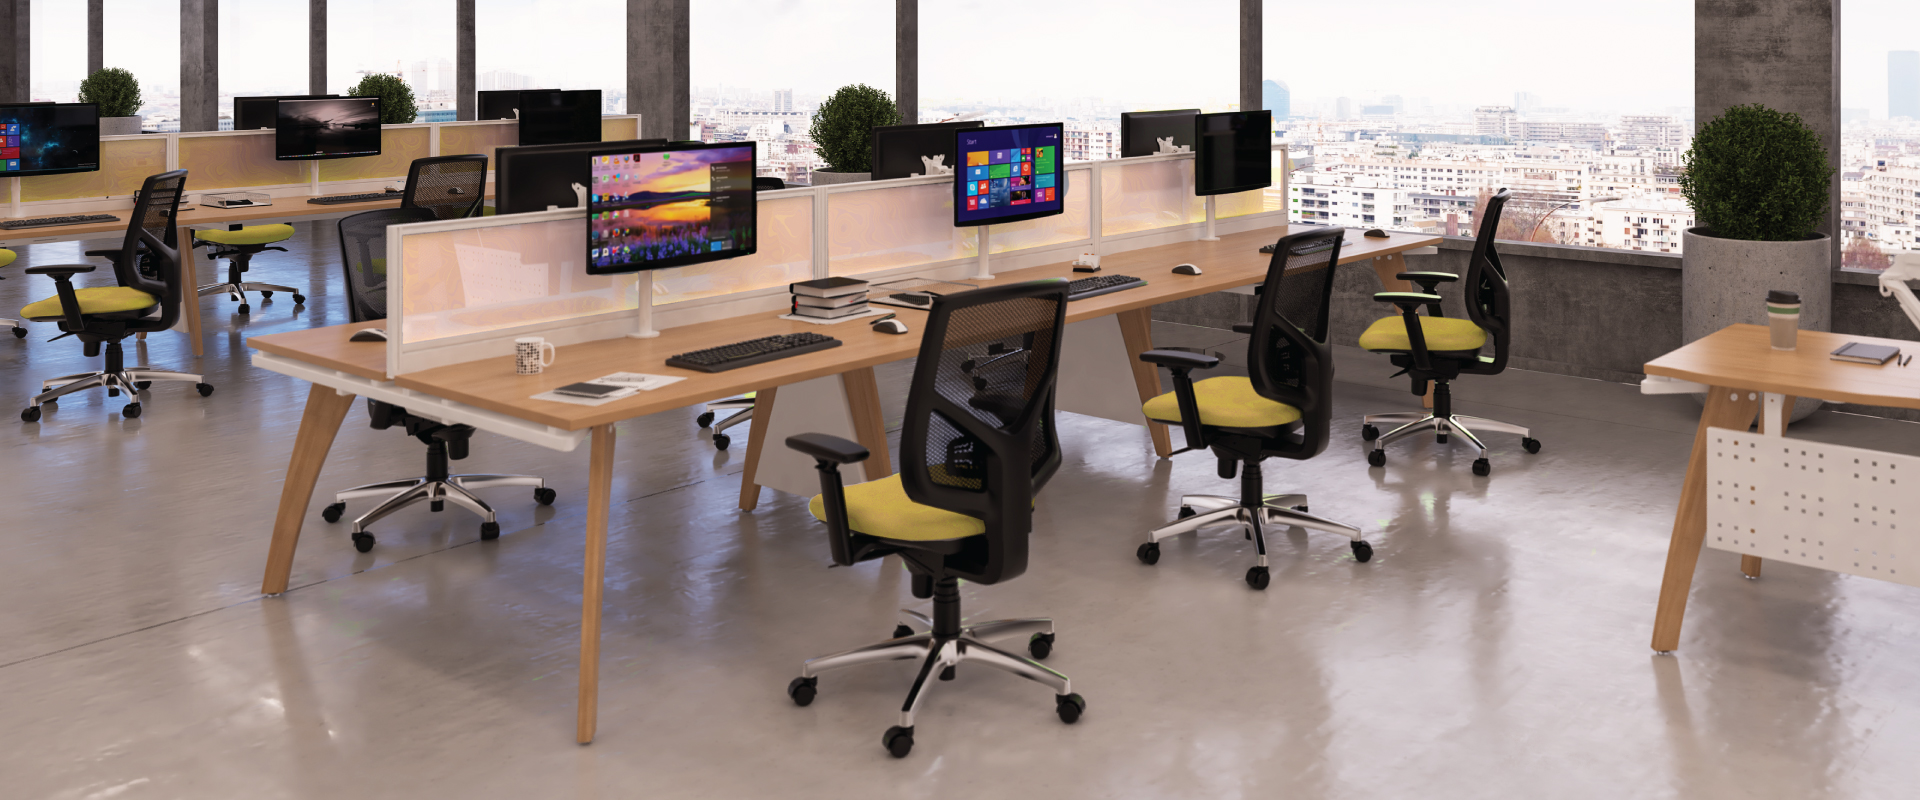 How workplace design can encourage movement - Fuze